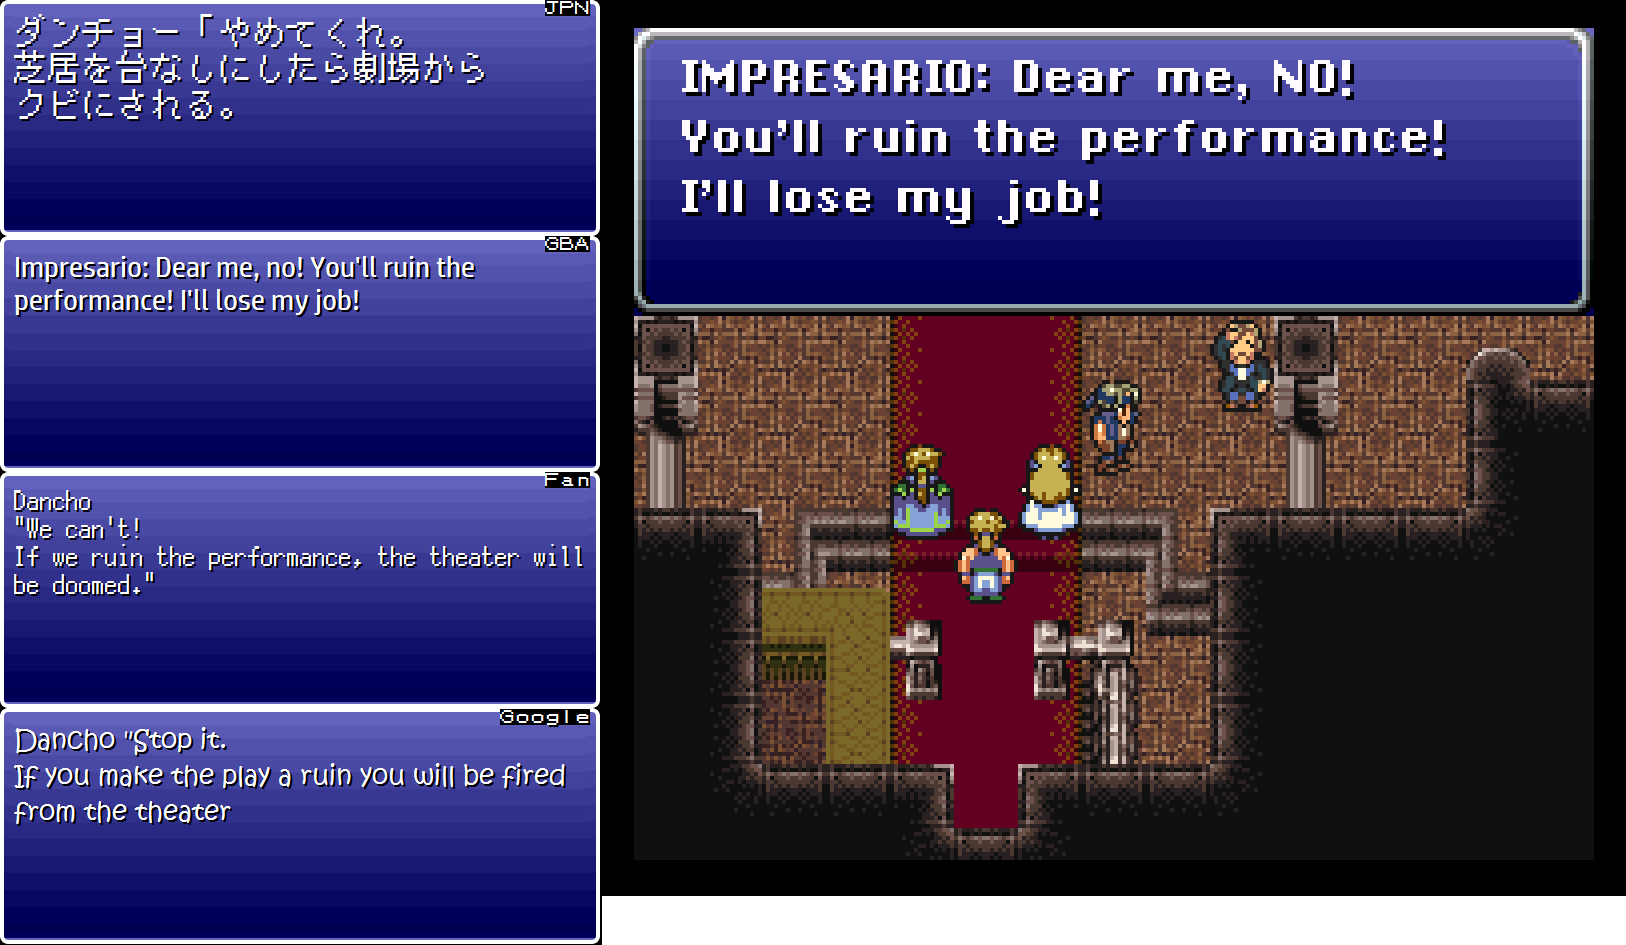 Final Fantasy 6 contains a scene of perfect desolation - and not